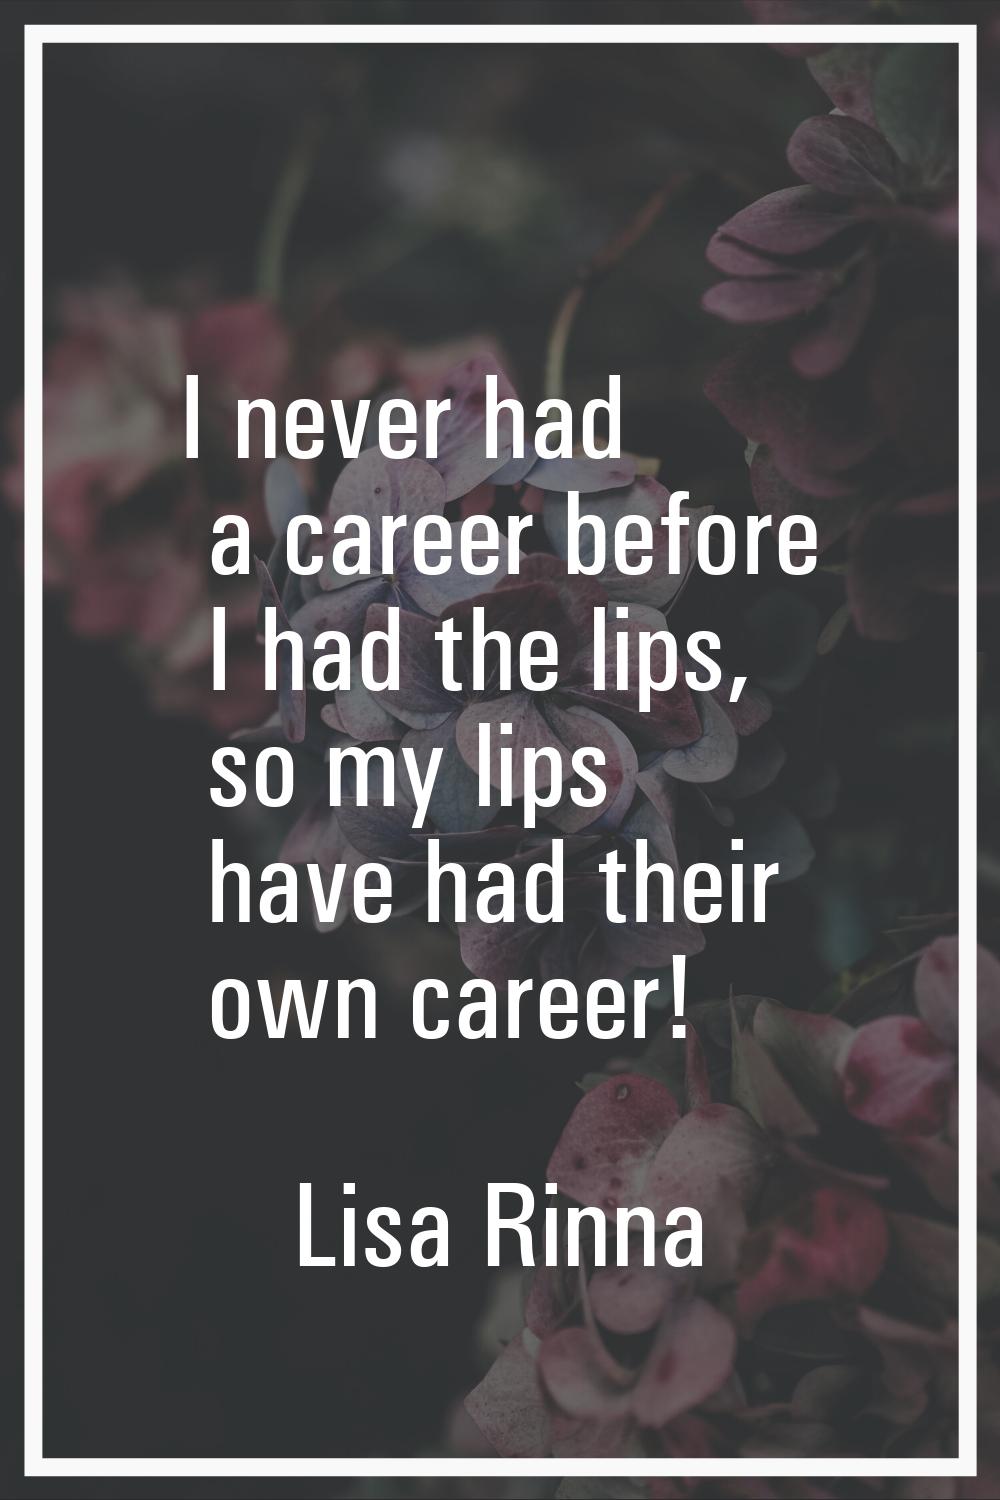 I never had a career before I had the lips, so my lips have had their own career!